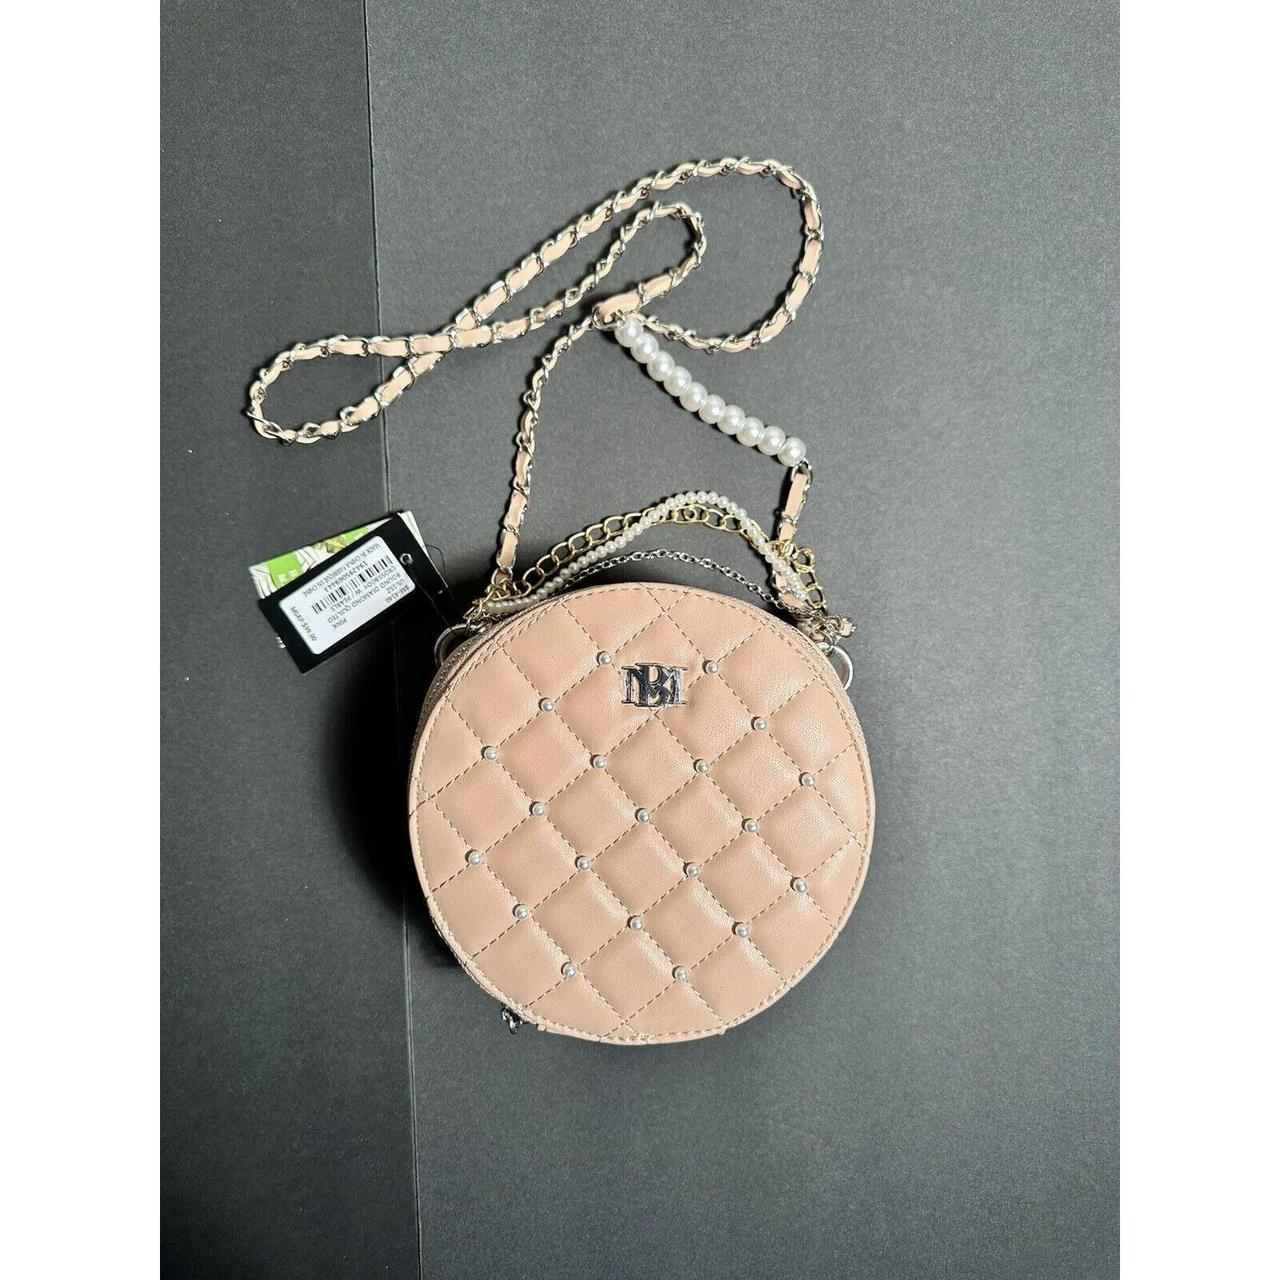 Buy REHBAR Round sling bag – Round leather purse messenger ladies handbag  for womens with strap, crossbody style side sling pouch bag purses women's  and girls (SL125) (Beige) at Amazon.in